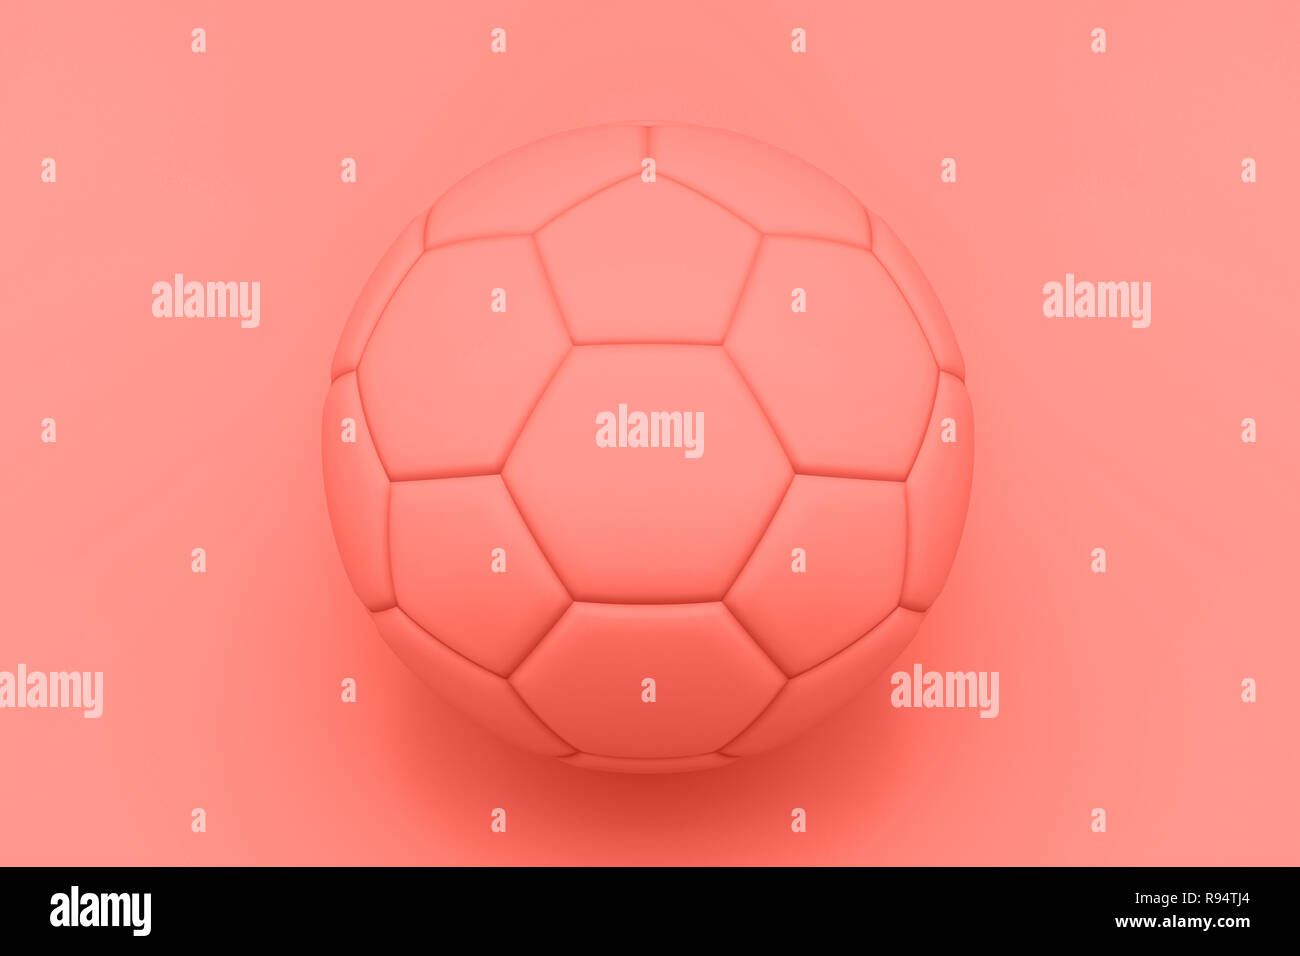 Soccer ball Painted trend living Coral color Stock Photo